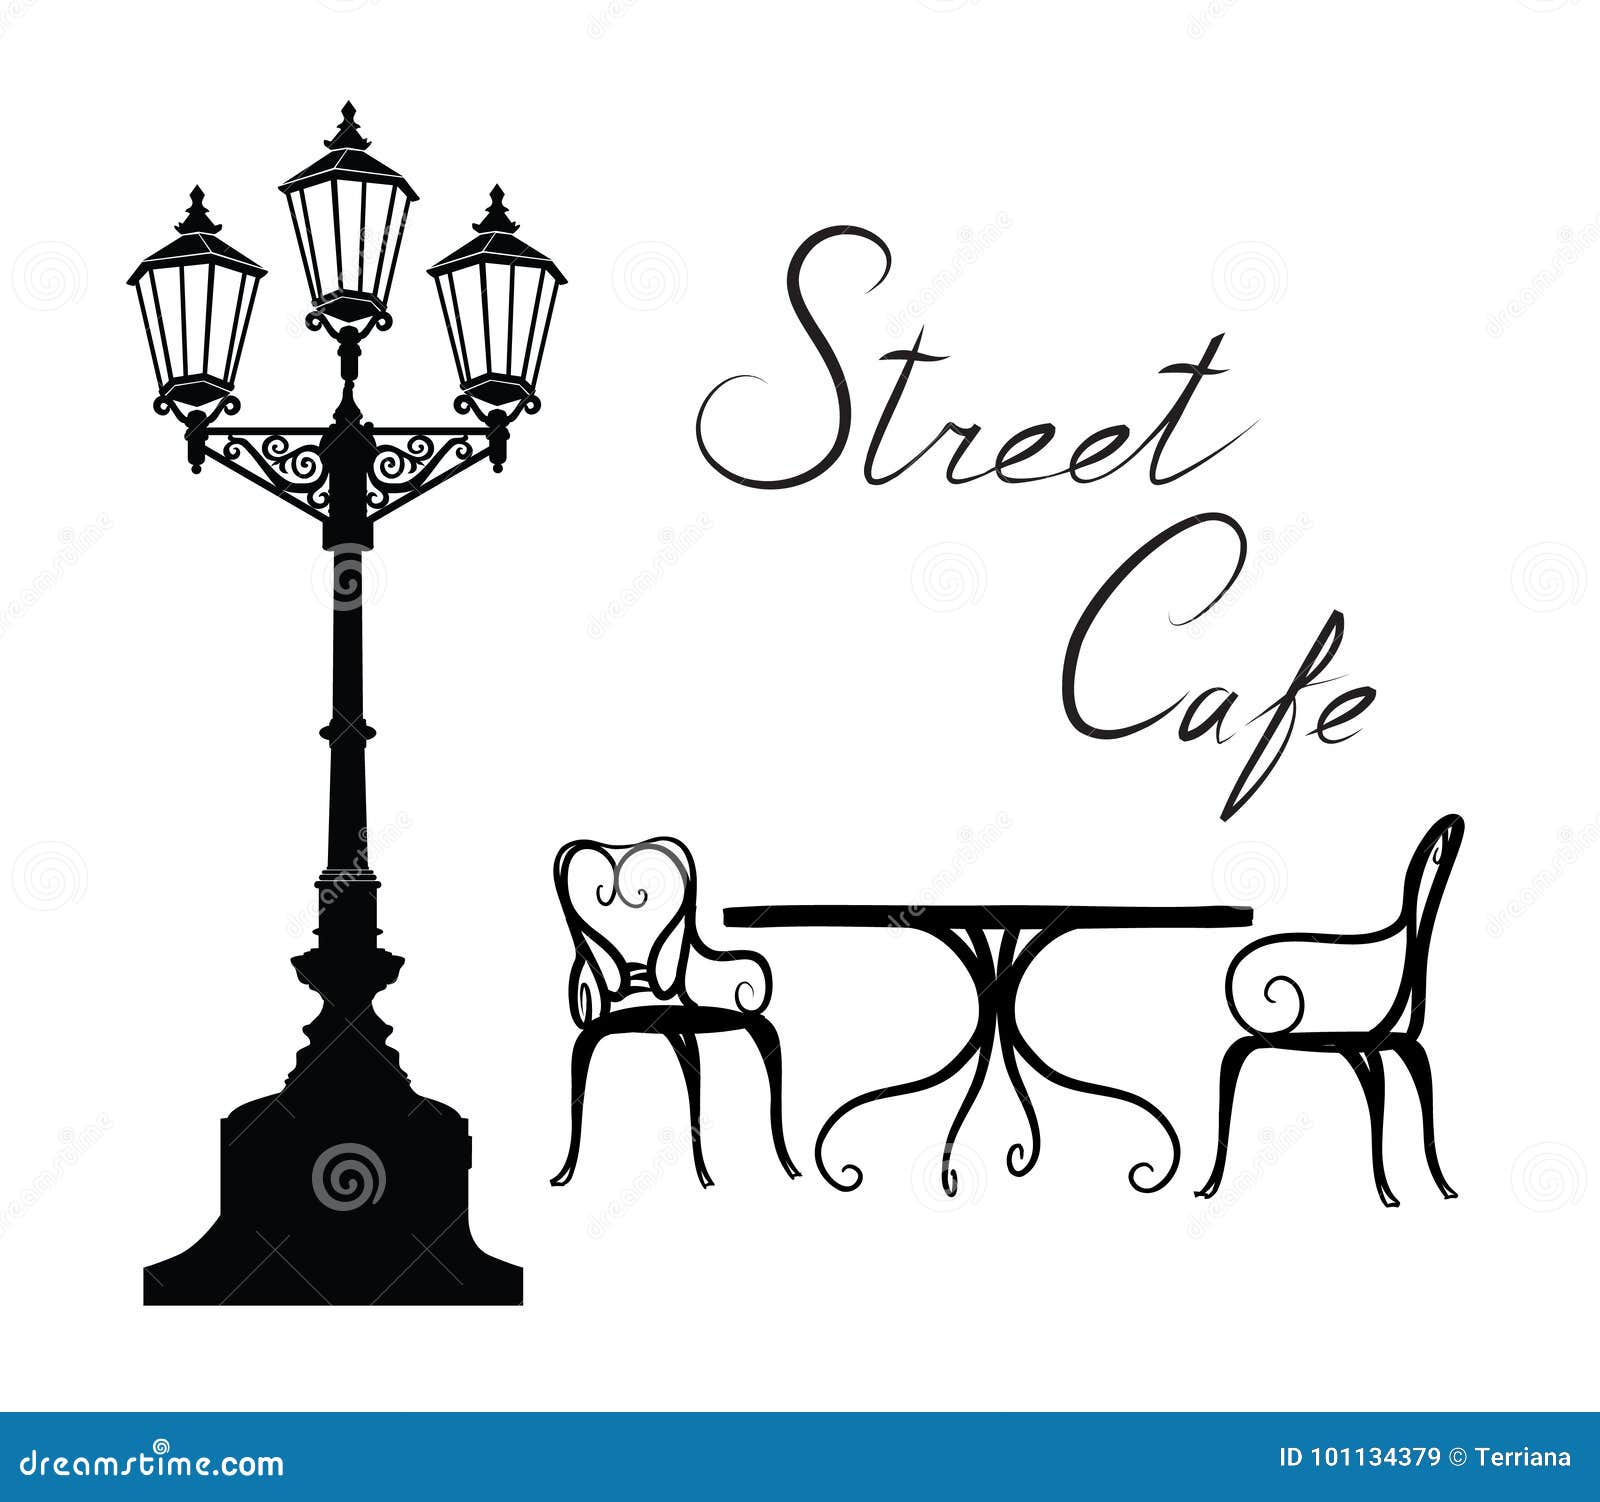 street cafe - table, chairs, streetlight and lettering city life